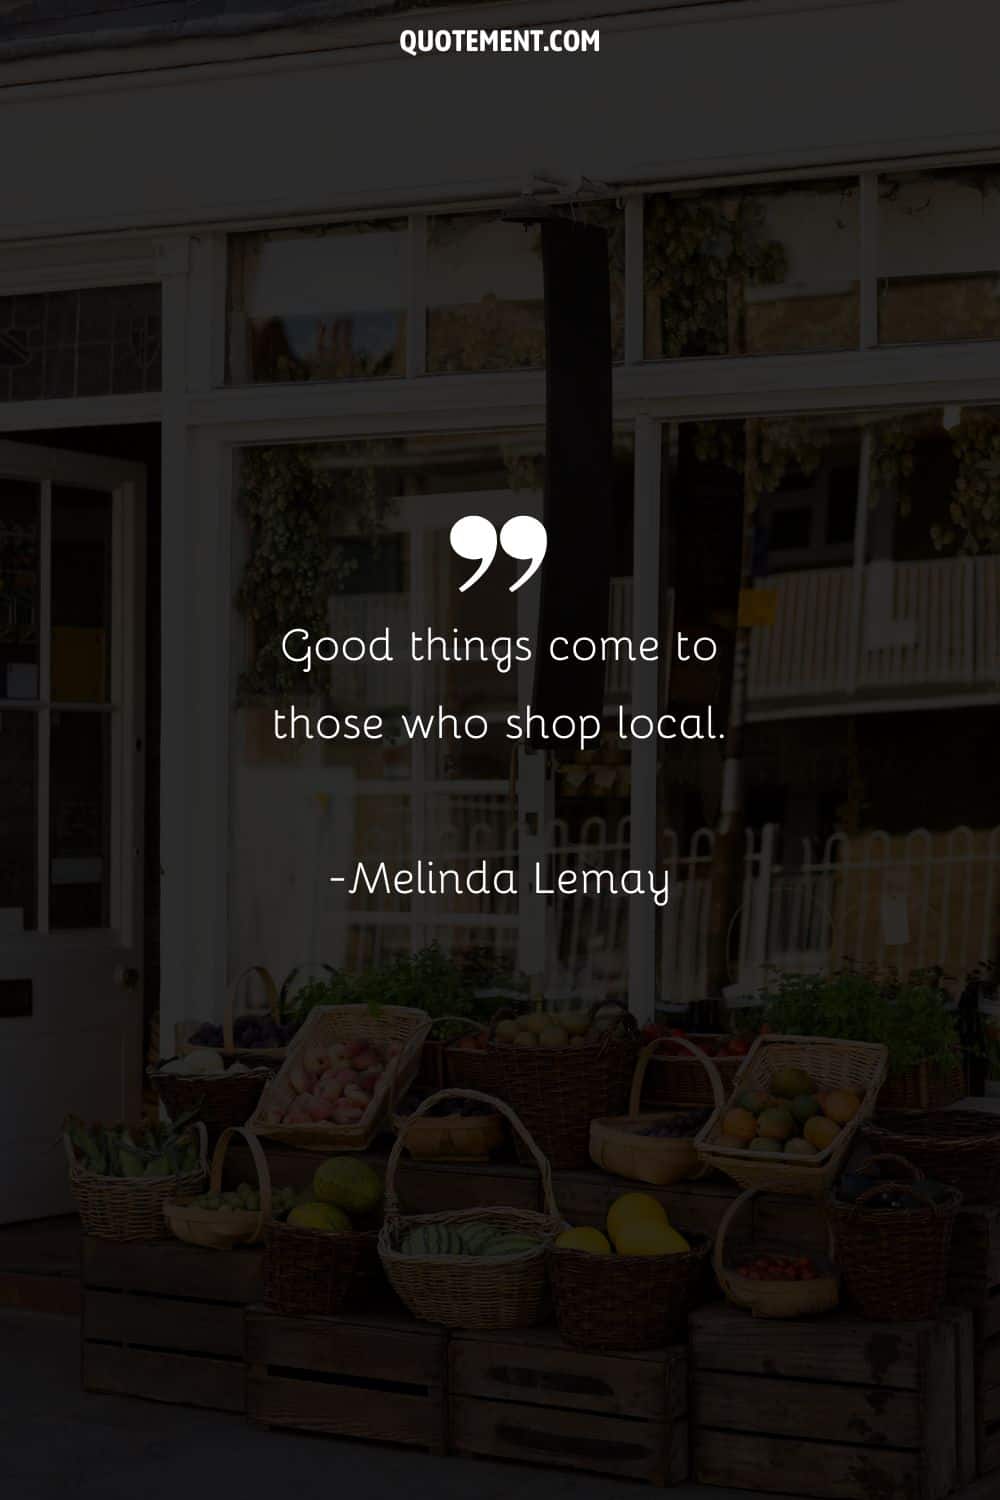 Good things come to those who shop local